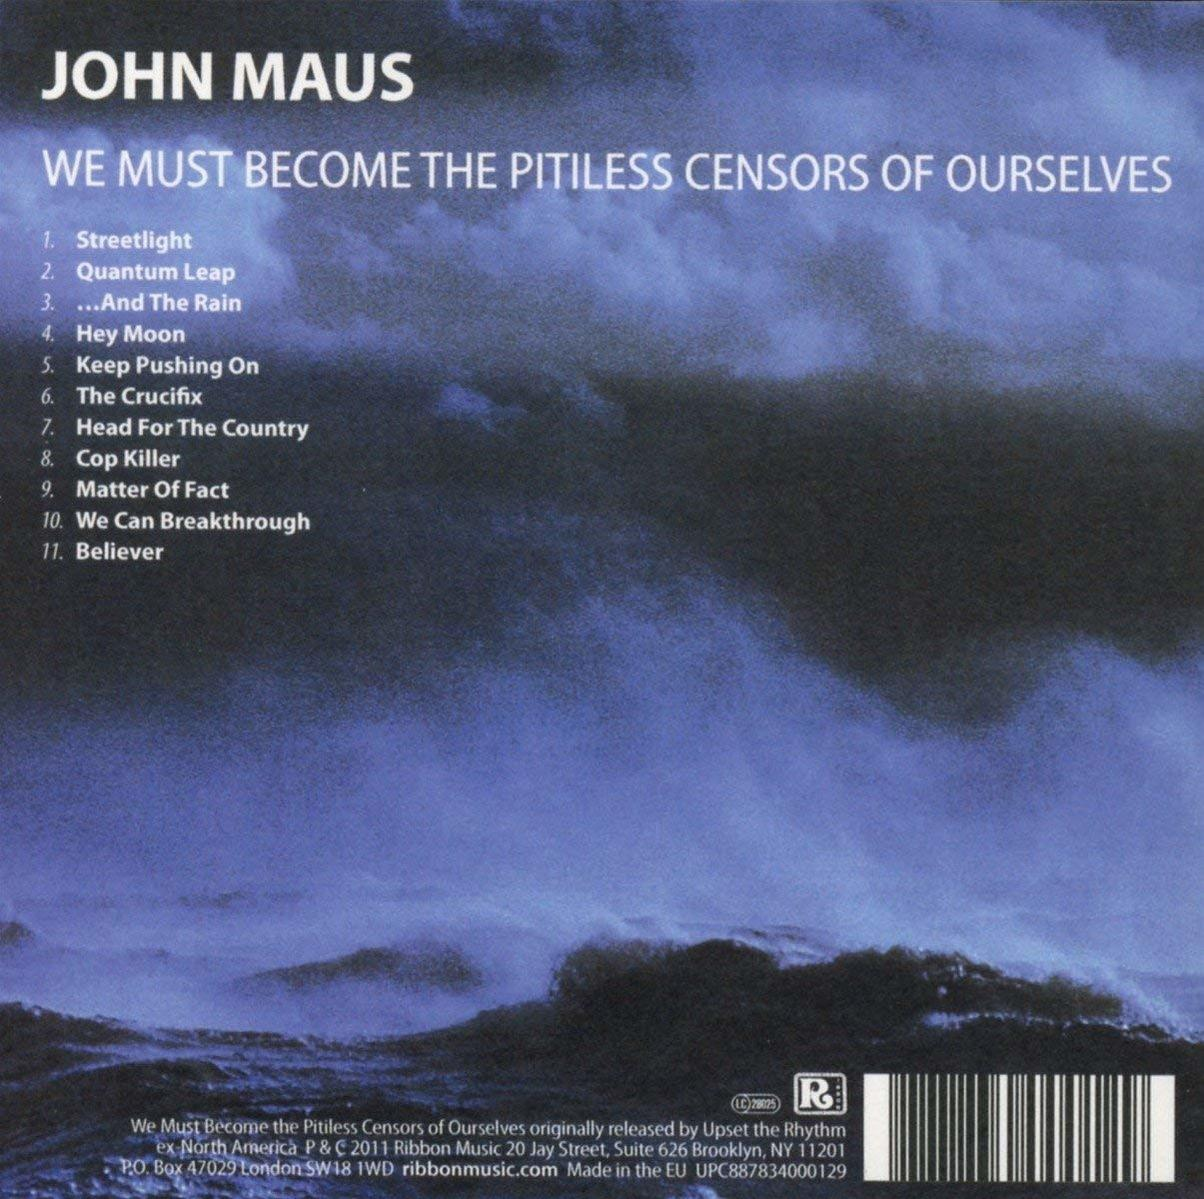 John Maus - Must Ourselves The We - Censors Of Pitiless Become (CD)